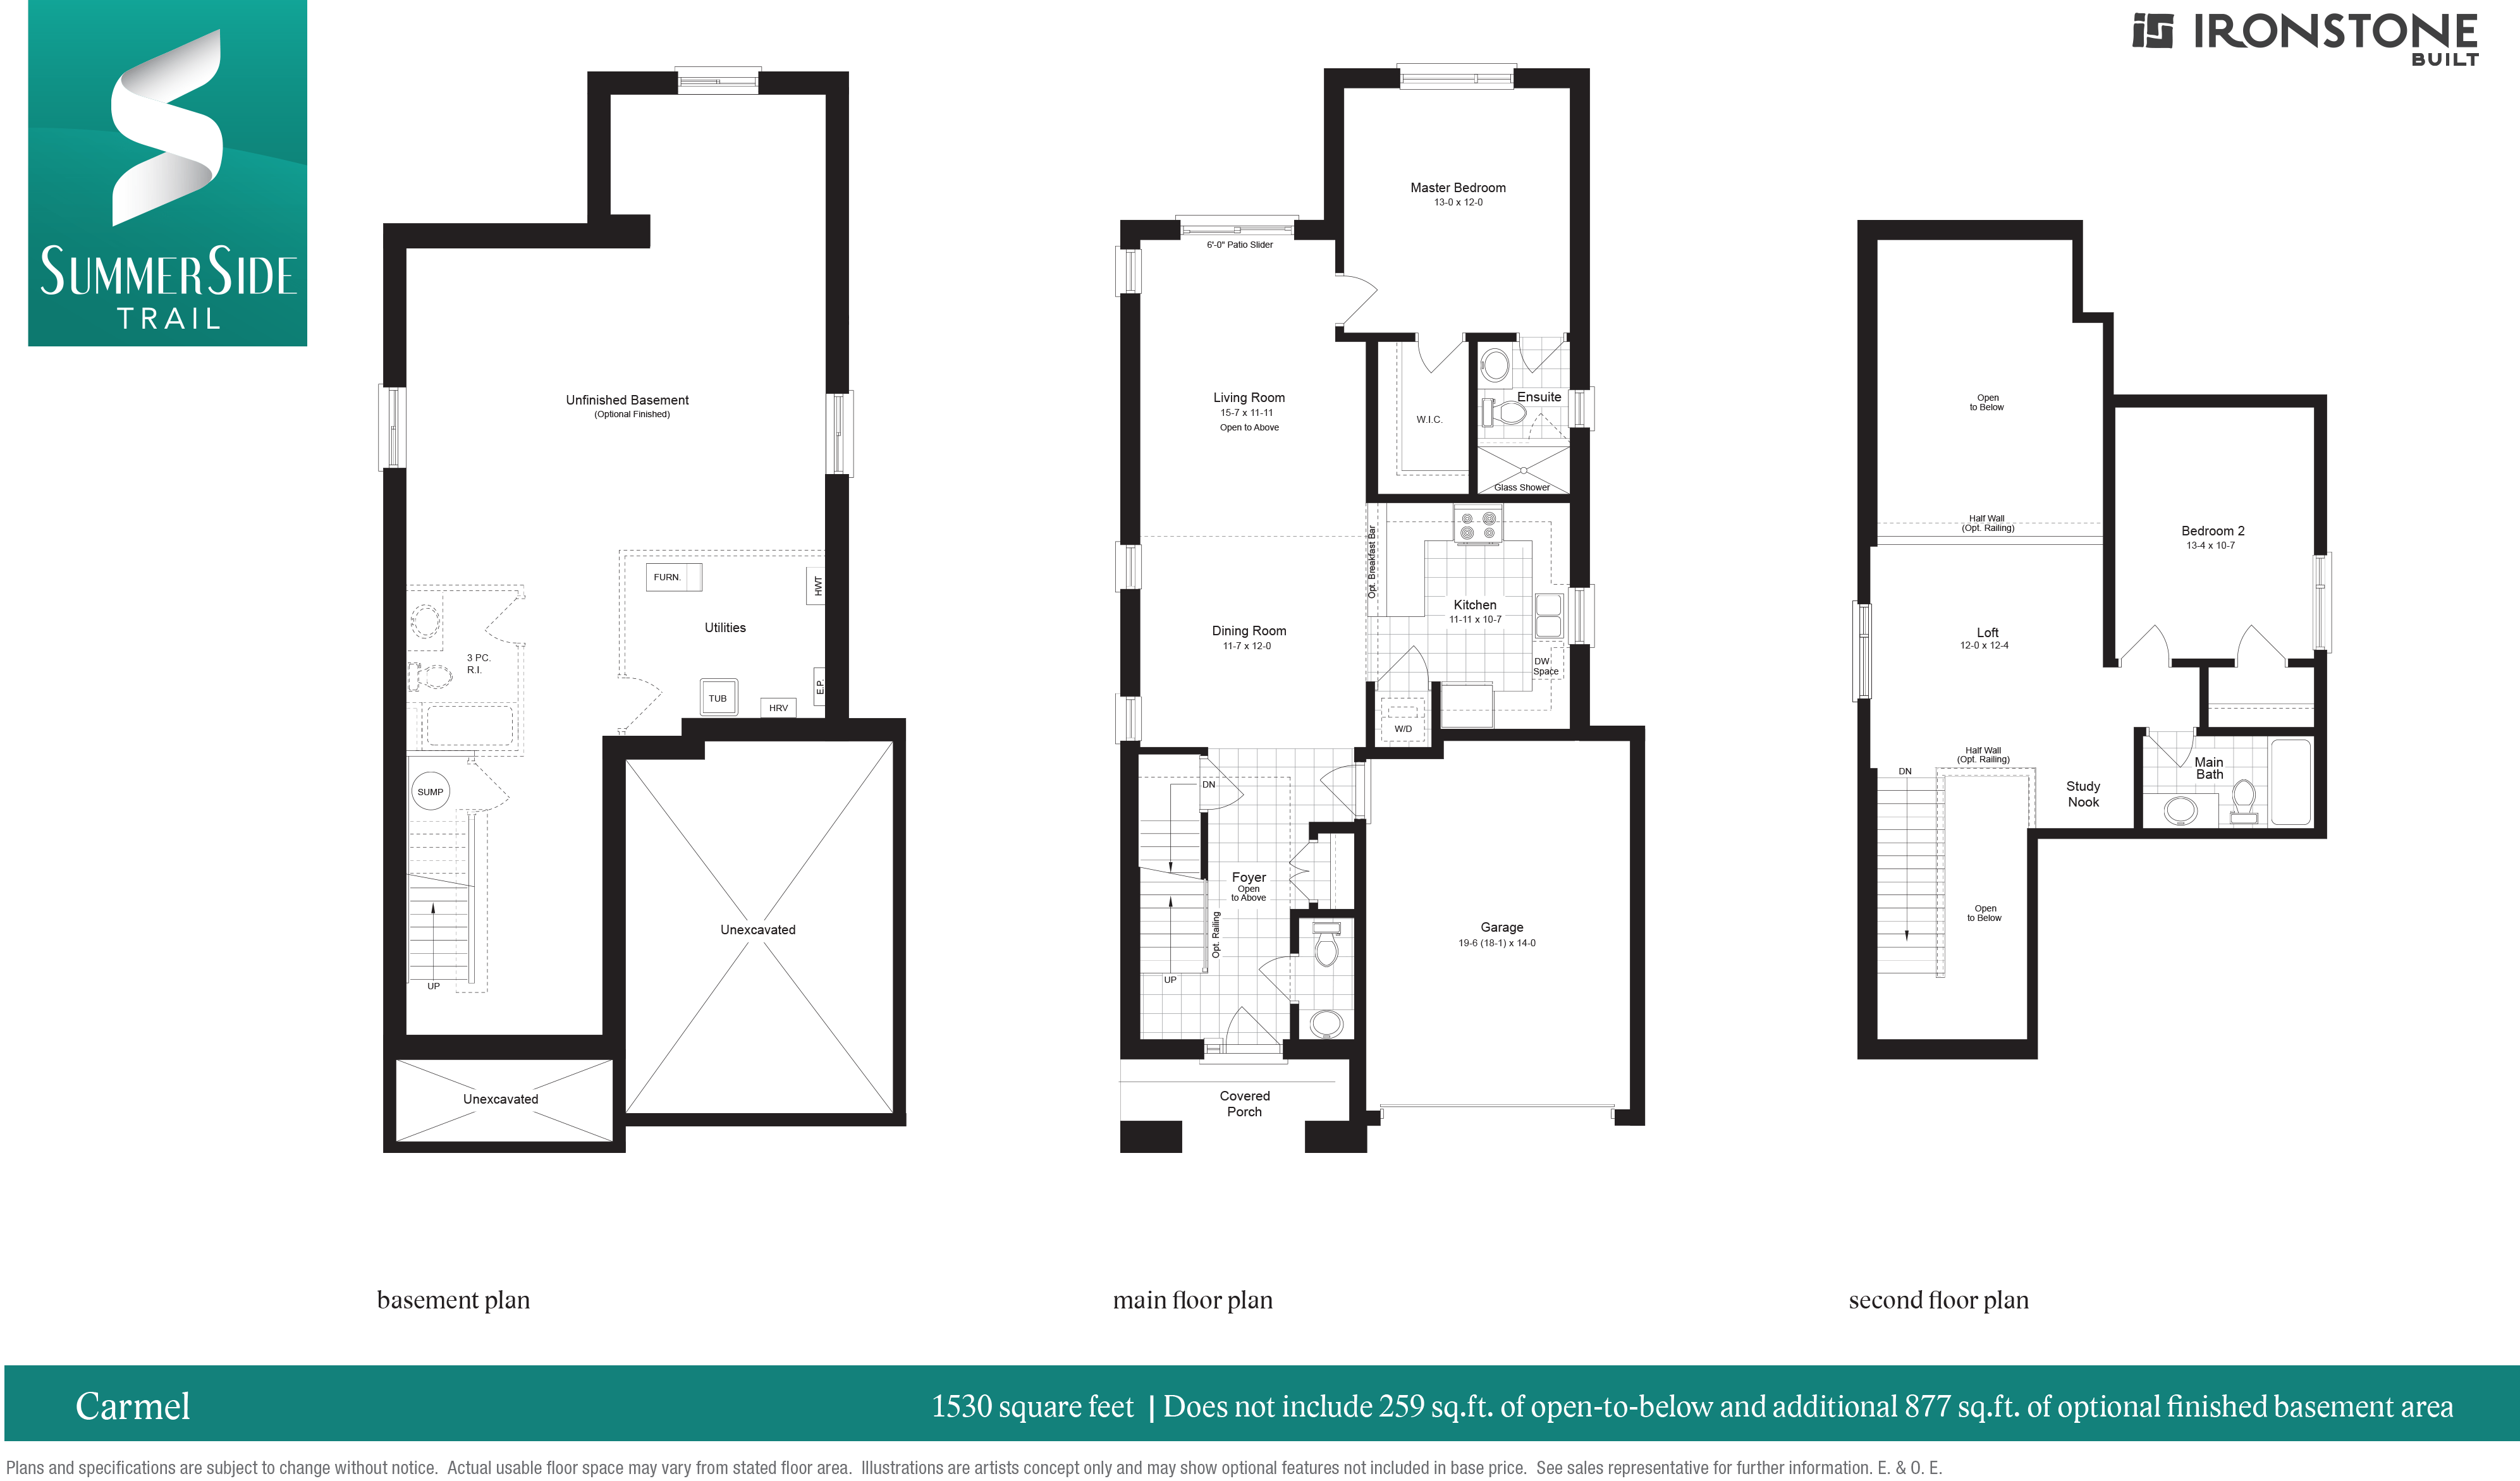 Carmel Floor Plan of Summerside Trail II with undefined beds